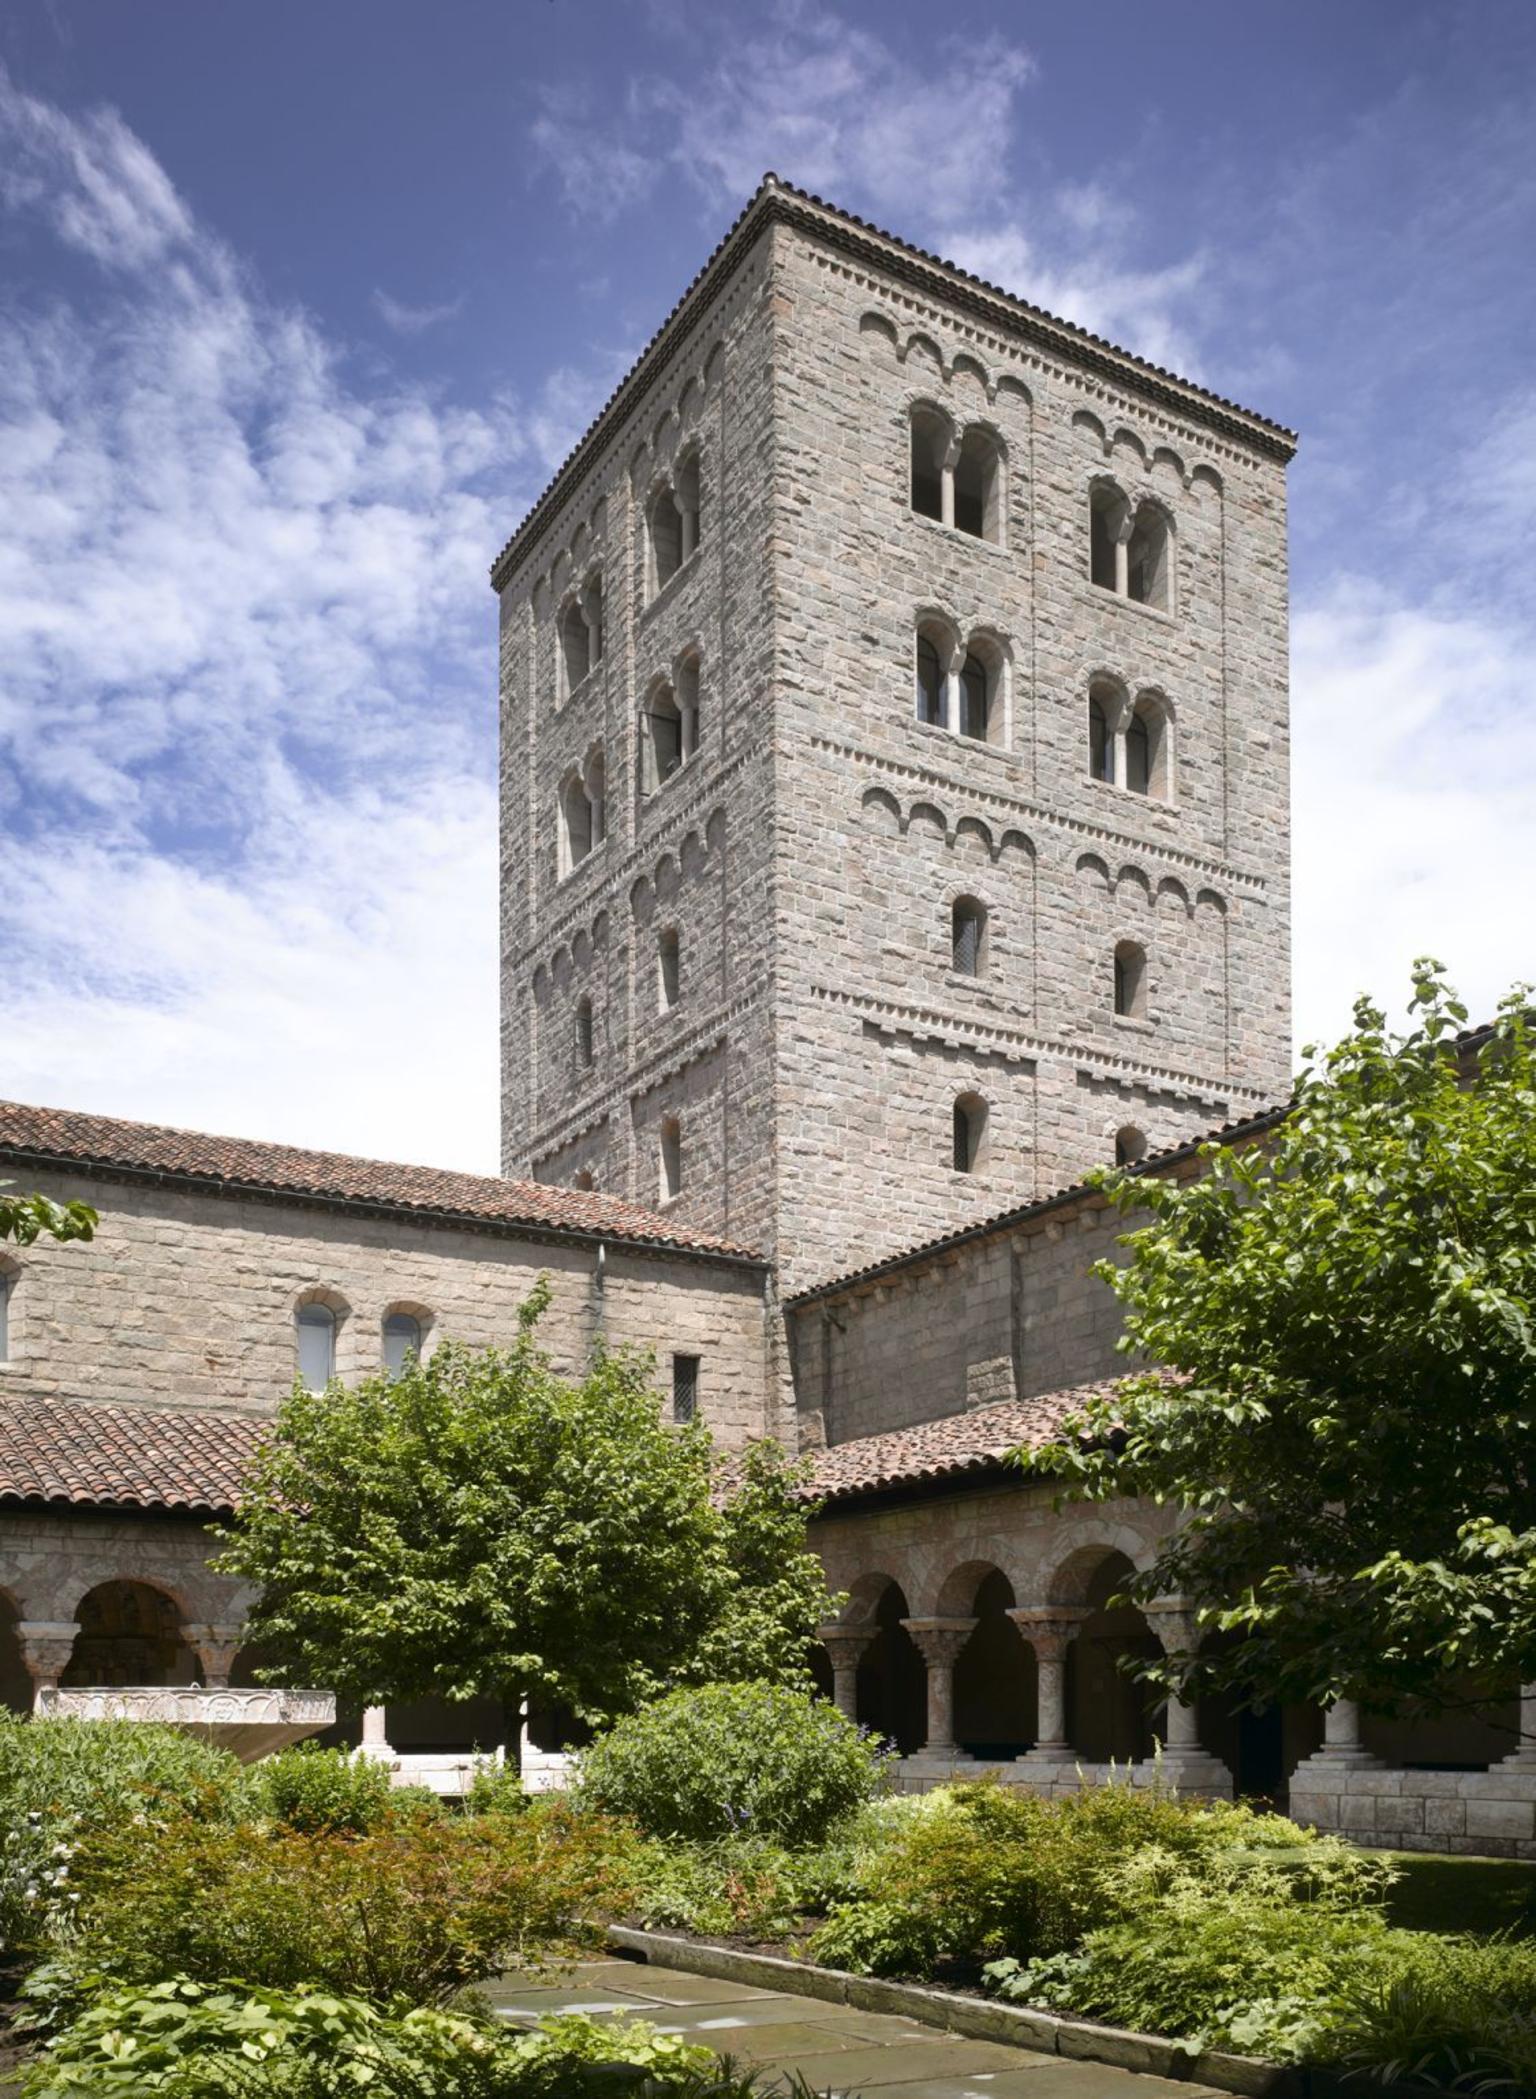 The Cloisters Museum and Gardens